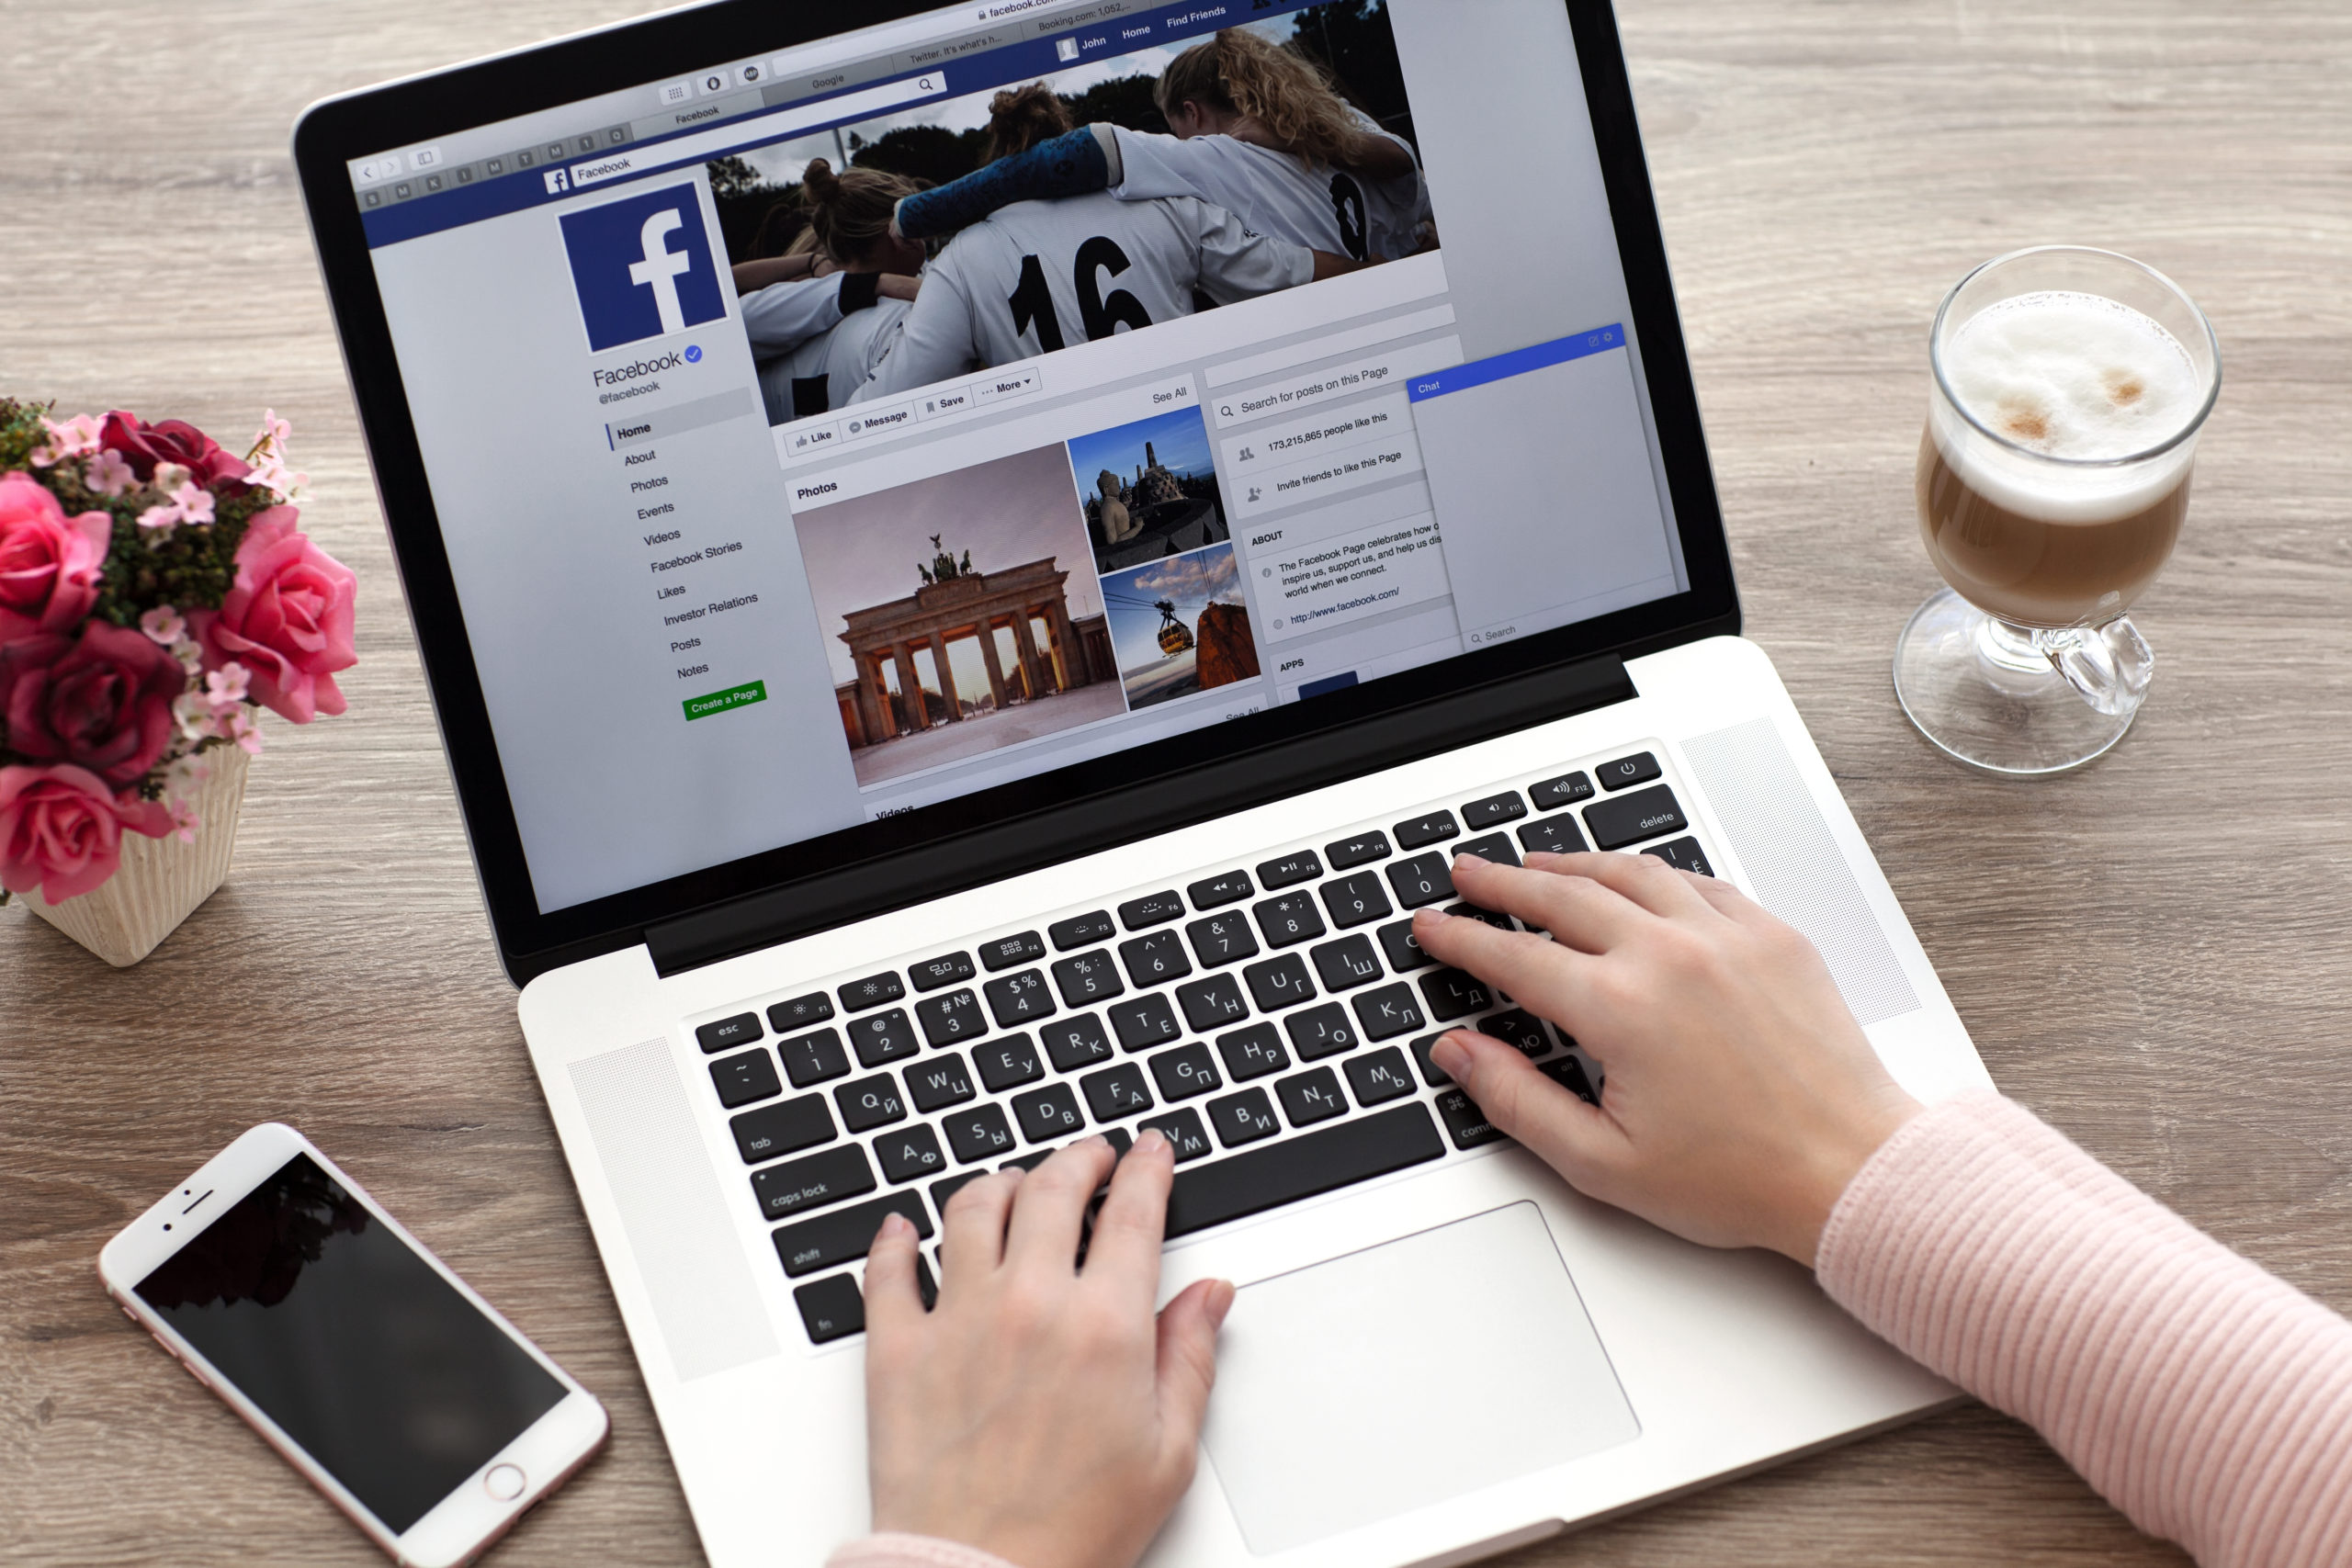 Best Steps to Create a Facebook Marketing Video That Works